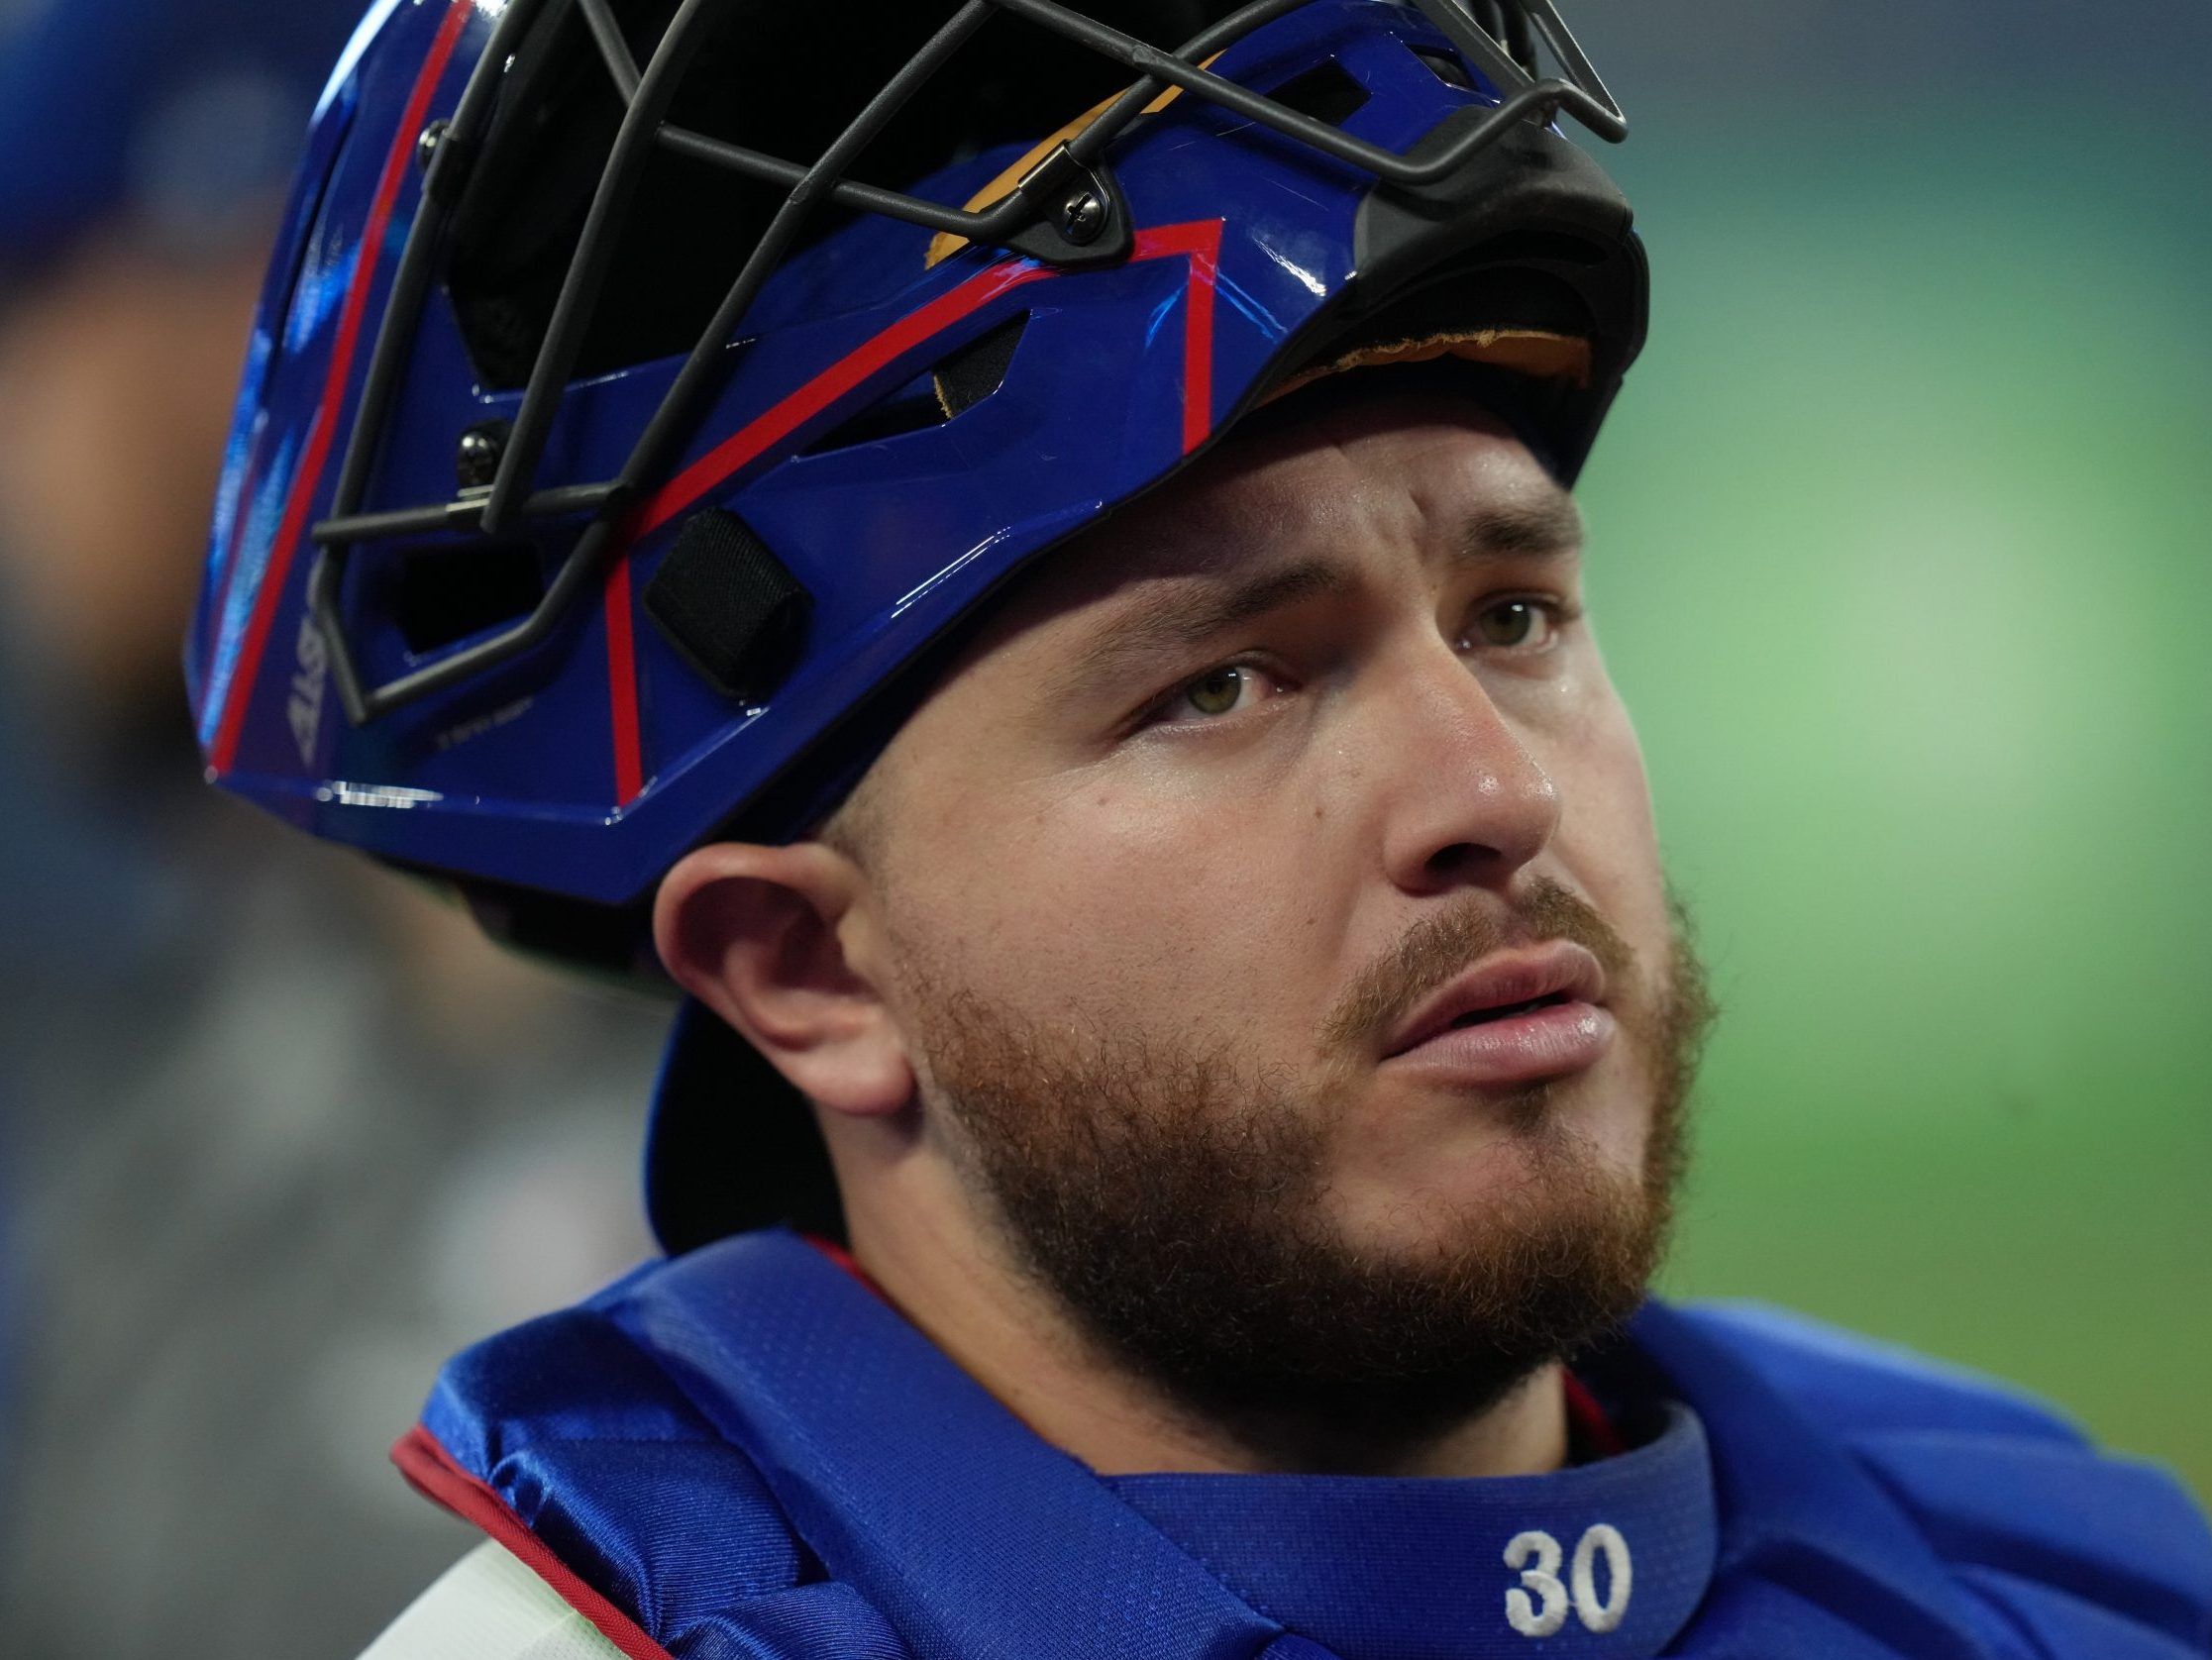 Catcher Alejandro Kirk activated off injured list by Blue Jays - NBC Sports